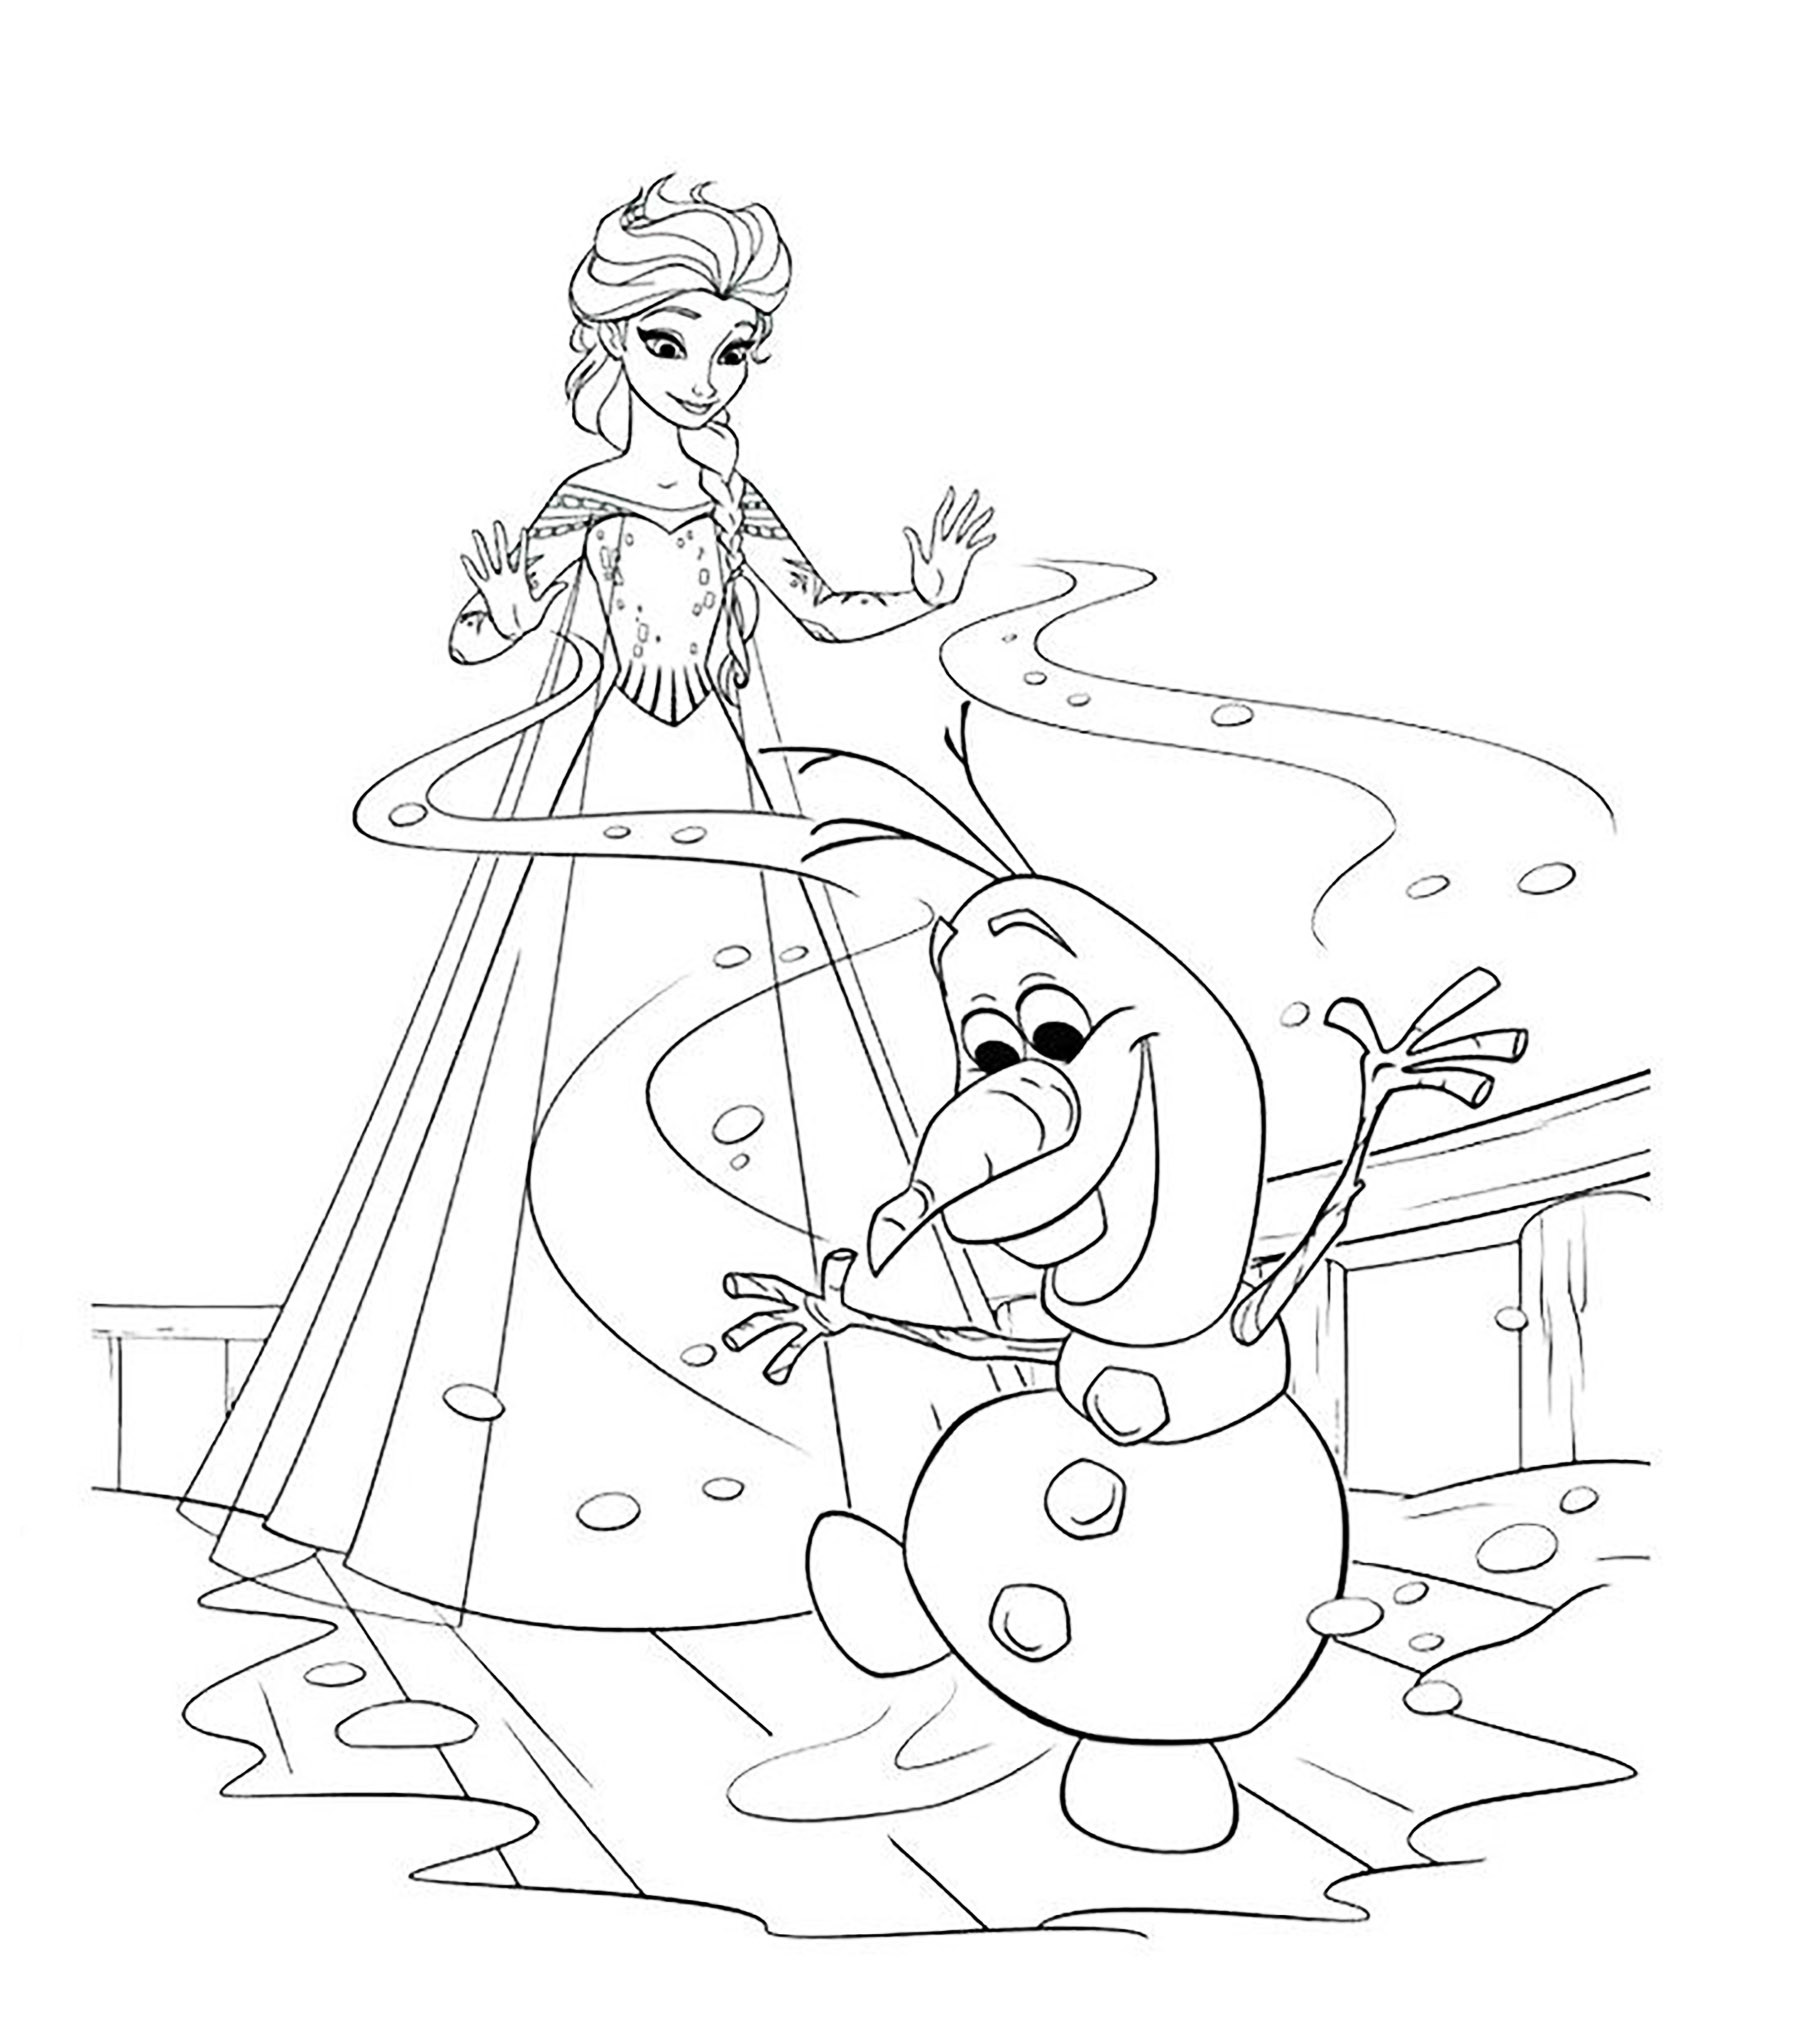 Coloring Pages For Kids Elsa
 Frozen free to color for children Frozen Kids Coloring Pages